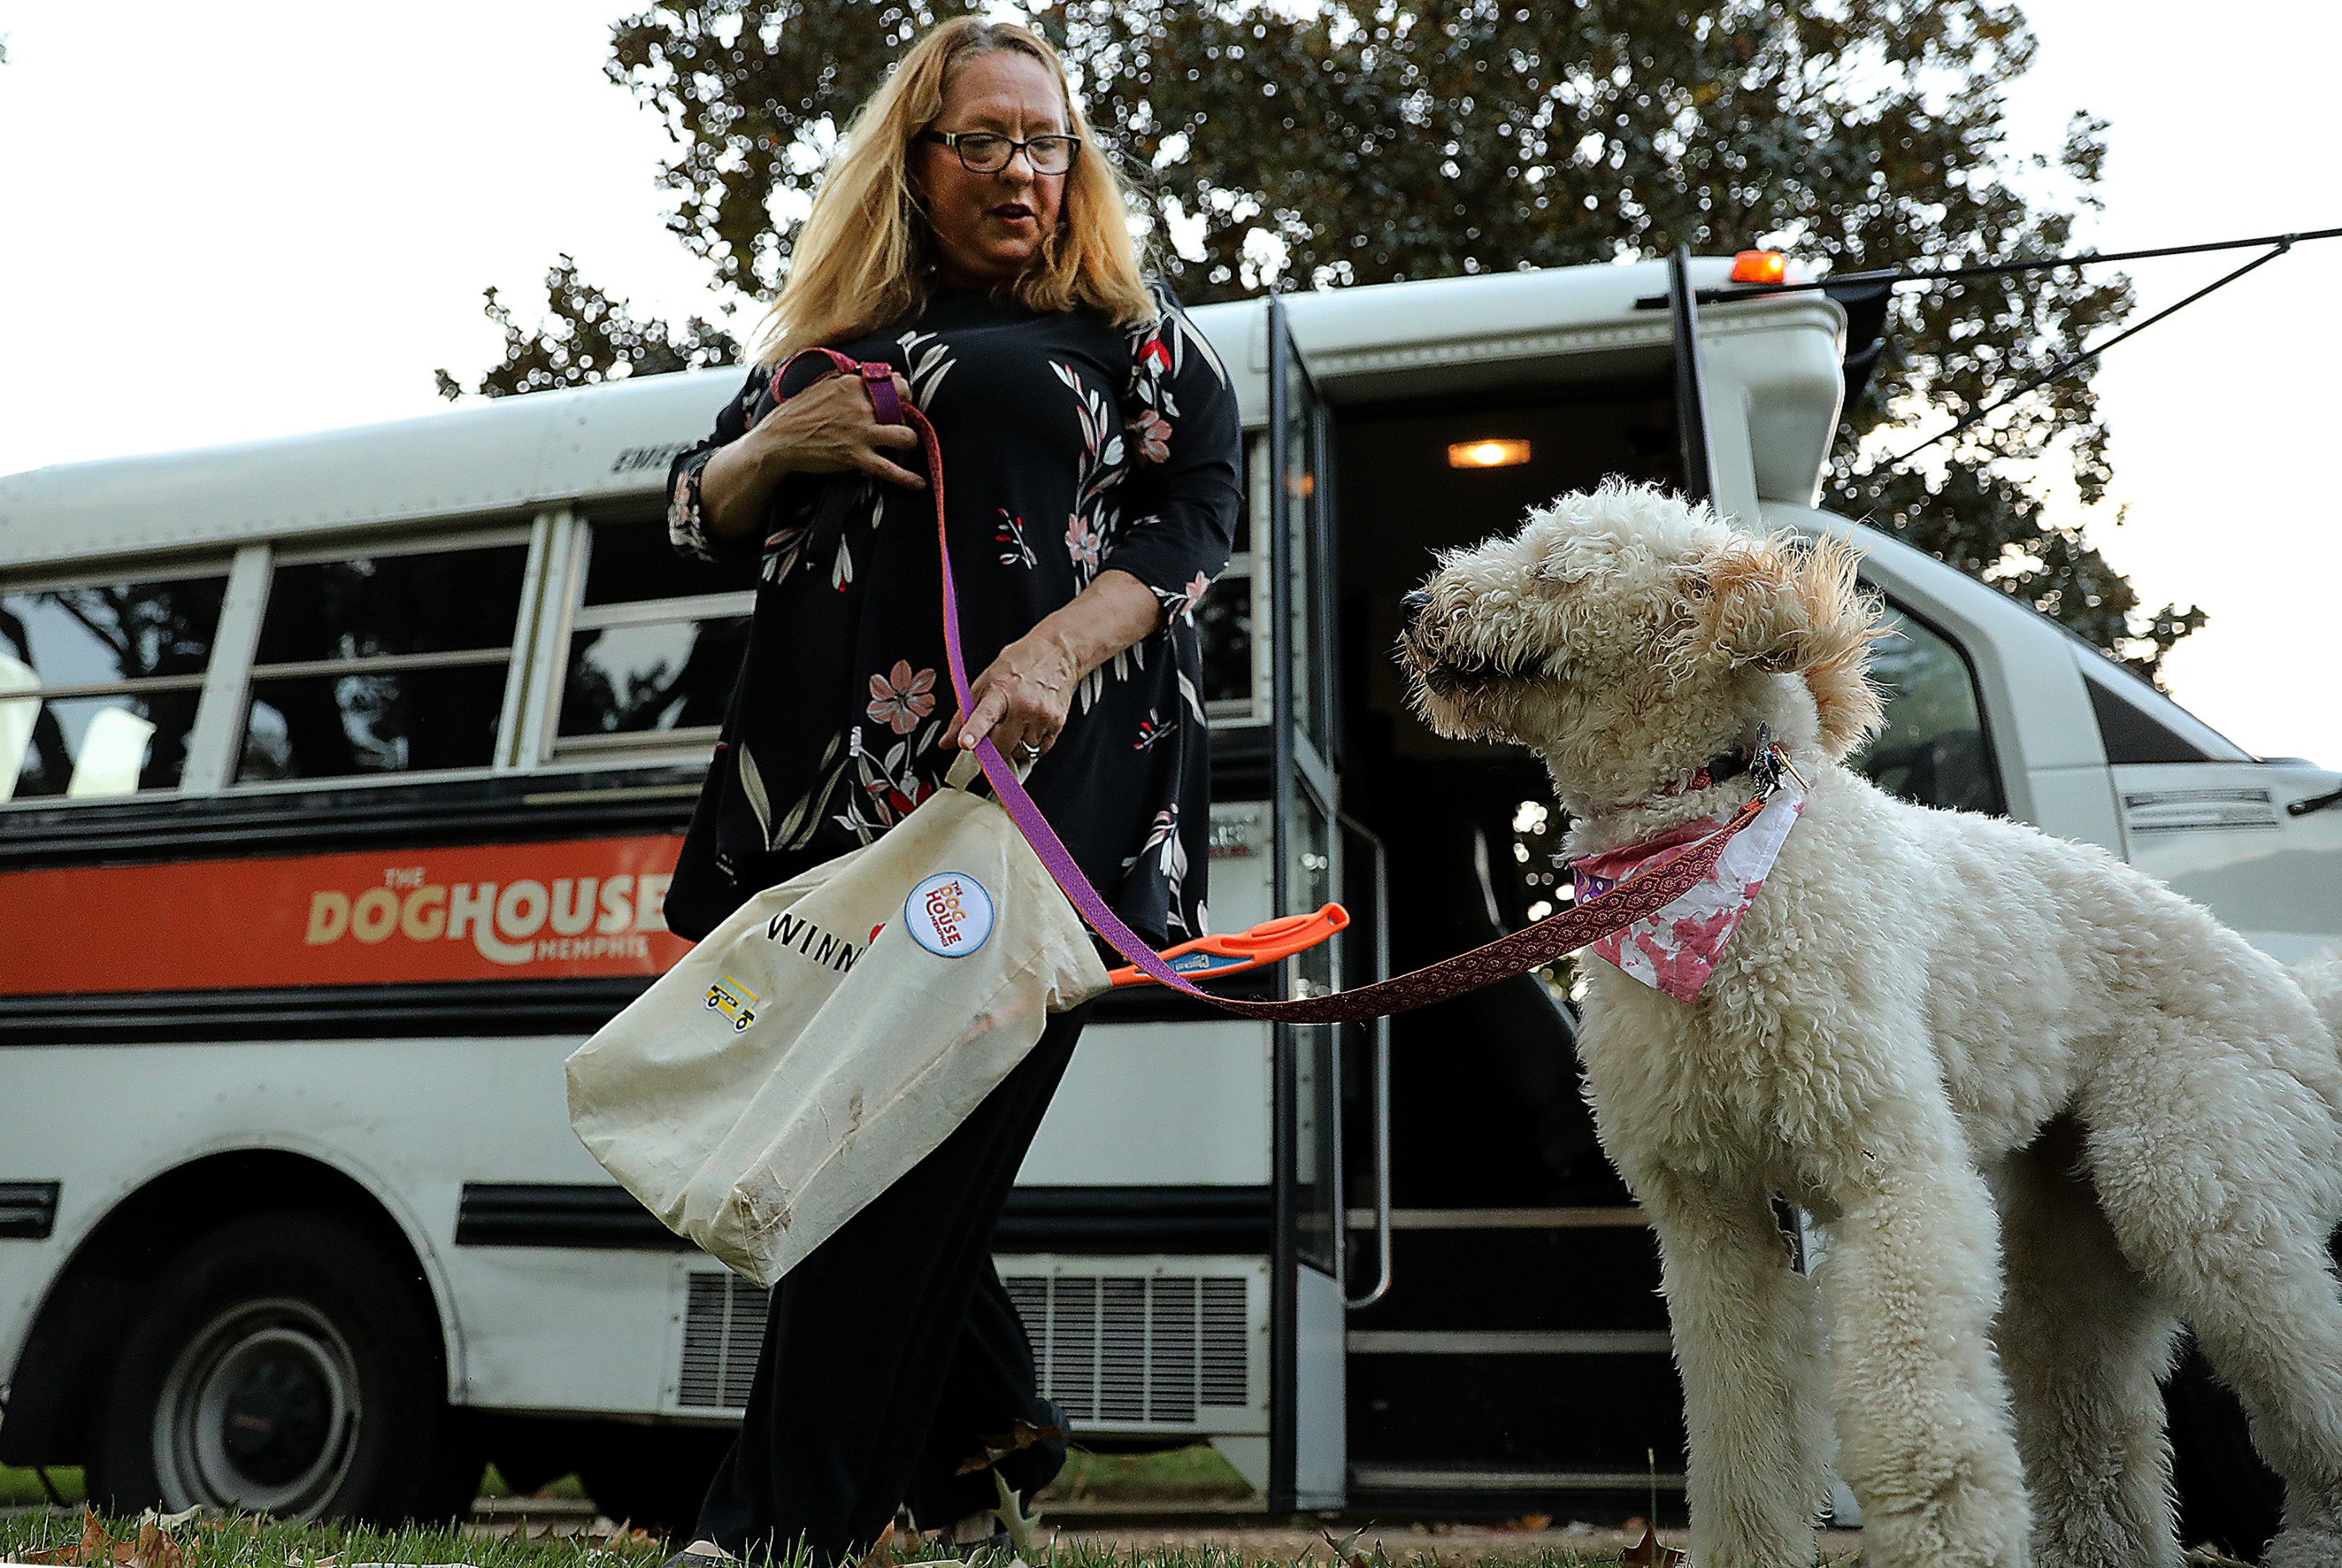 Office manager Judith Currin drops a client off at home after a busy day at daycare. A ride in the custom bus is a favorite activity for the dogs. (Patrick Lantrip/Daily Memphian)